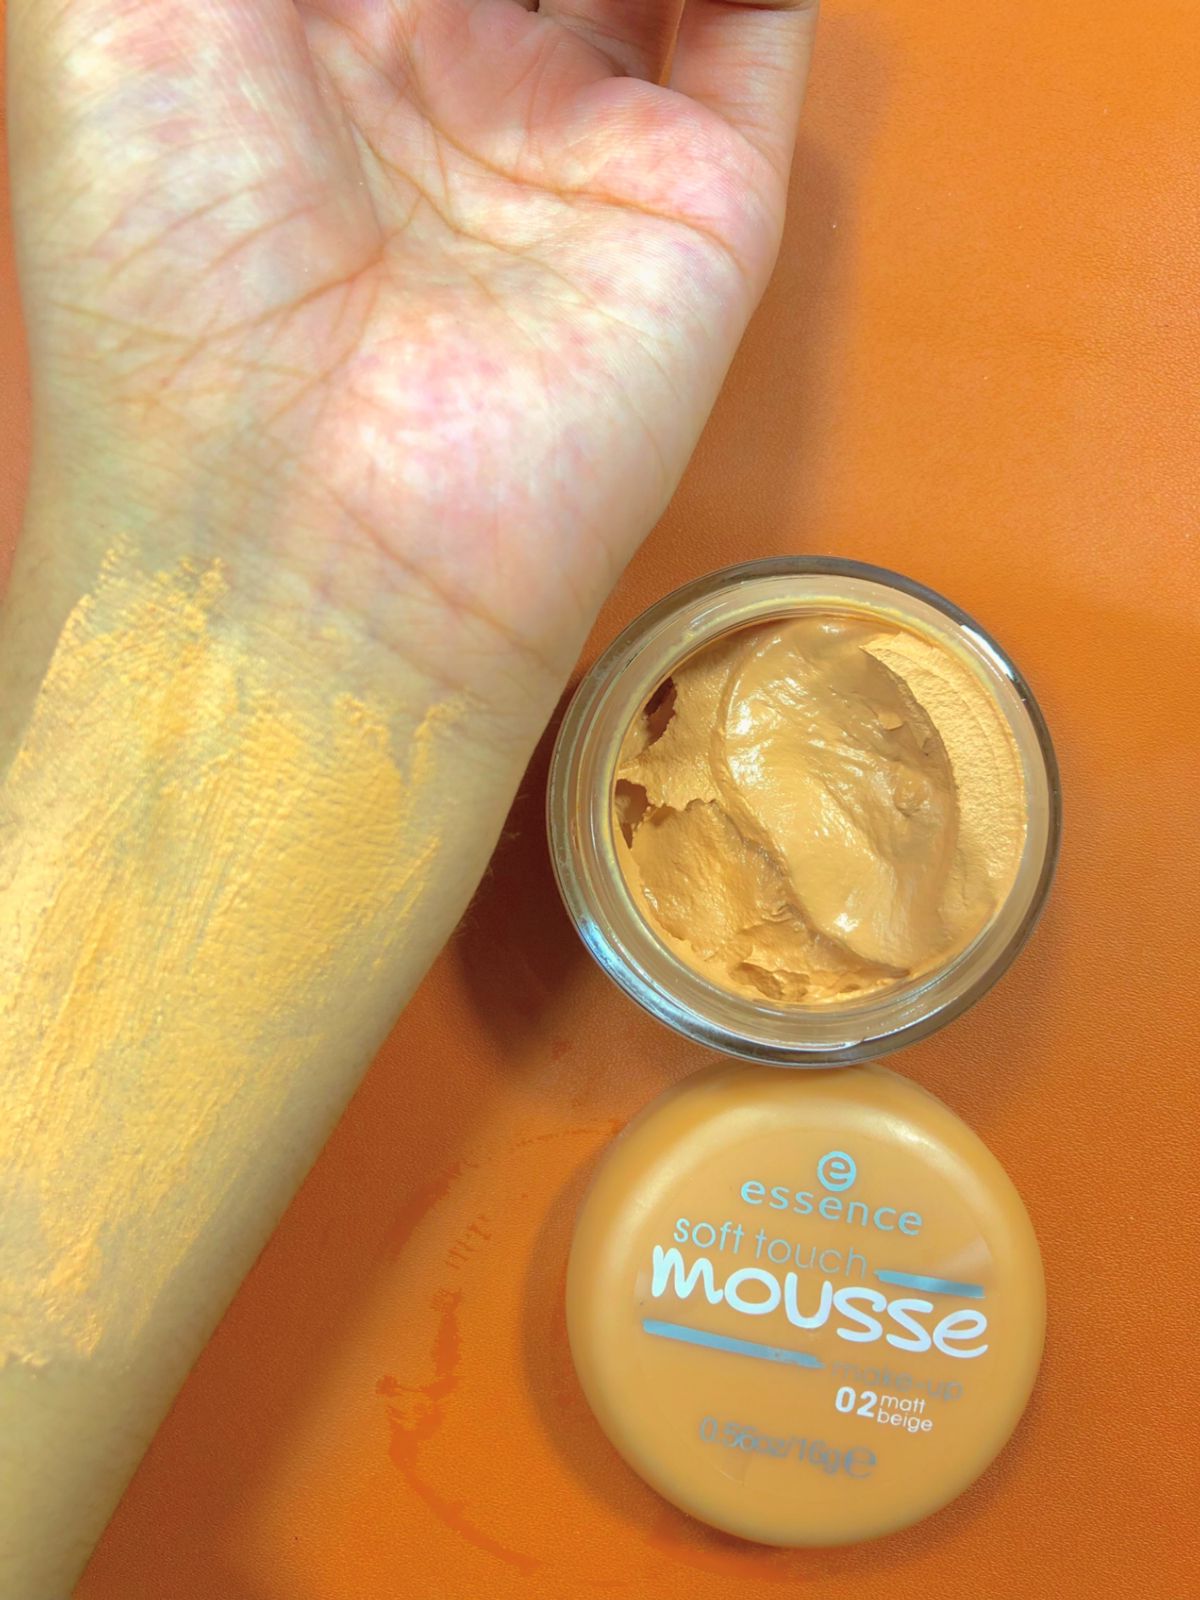 FOUNDATION ESSENSE SOFTTOUCH MOUSE MAKEUP